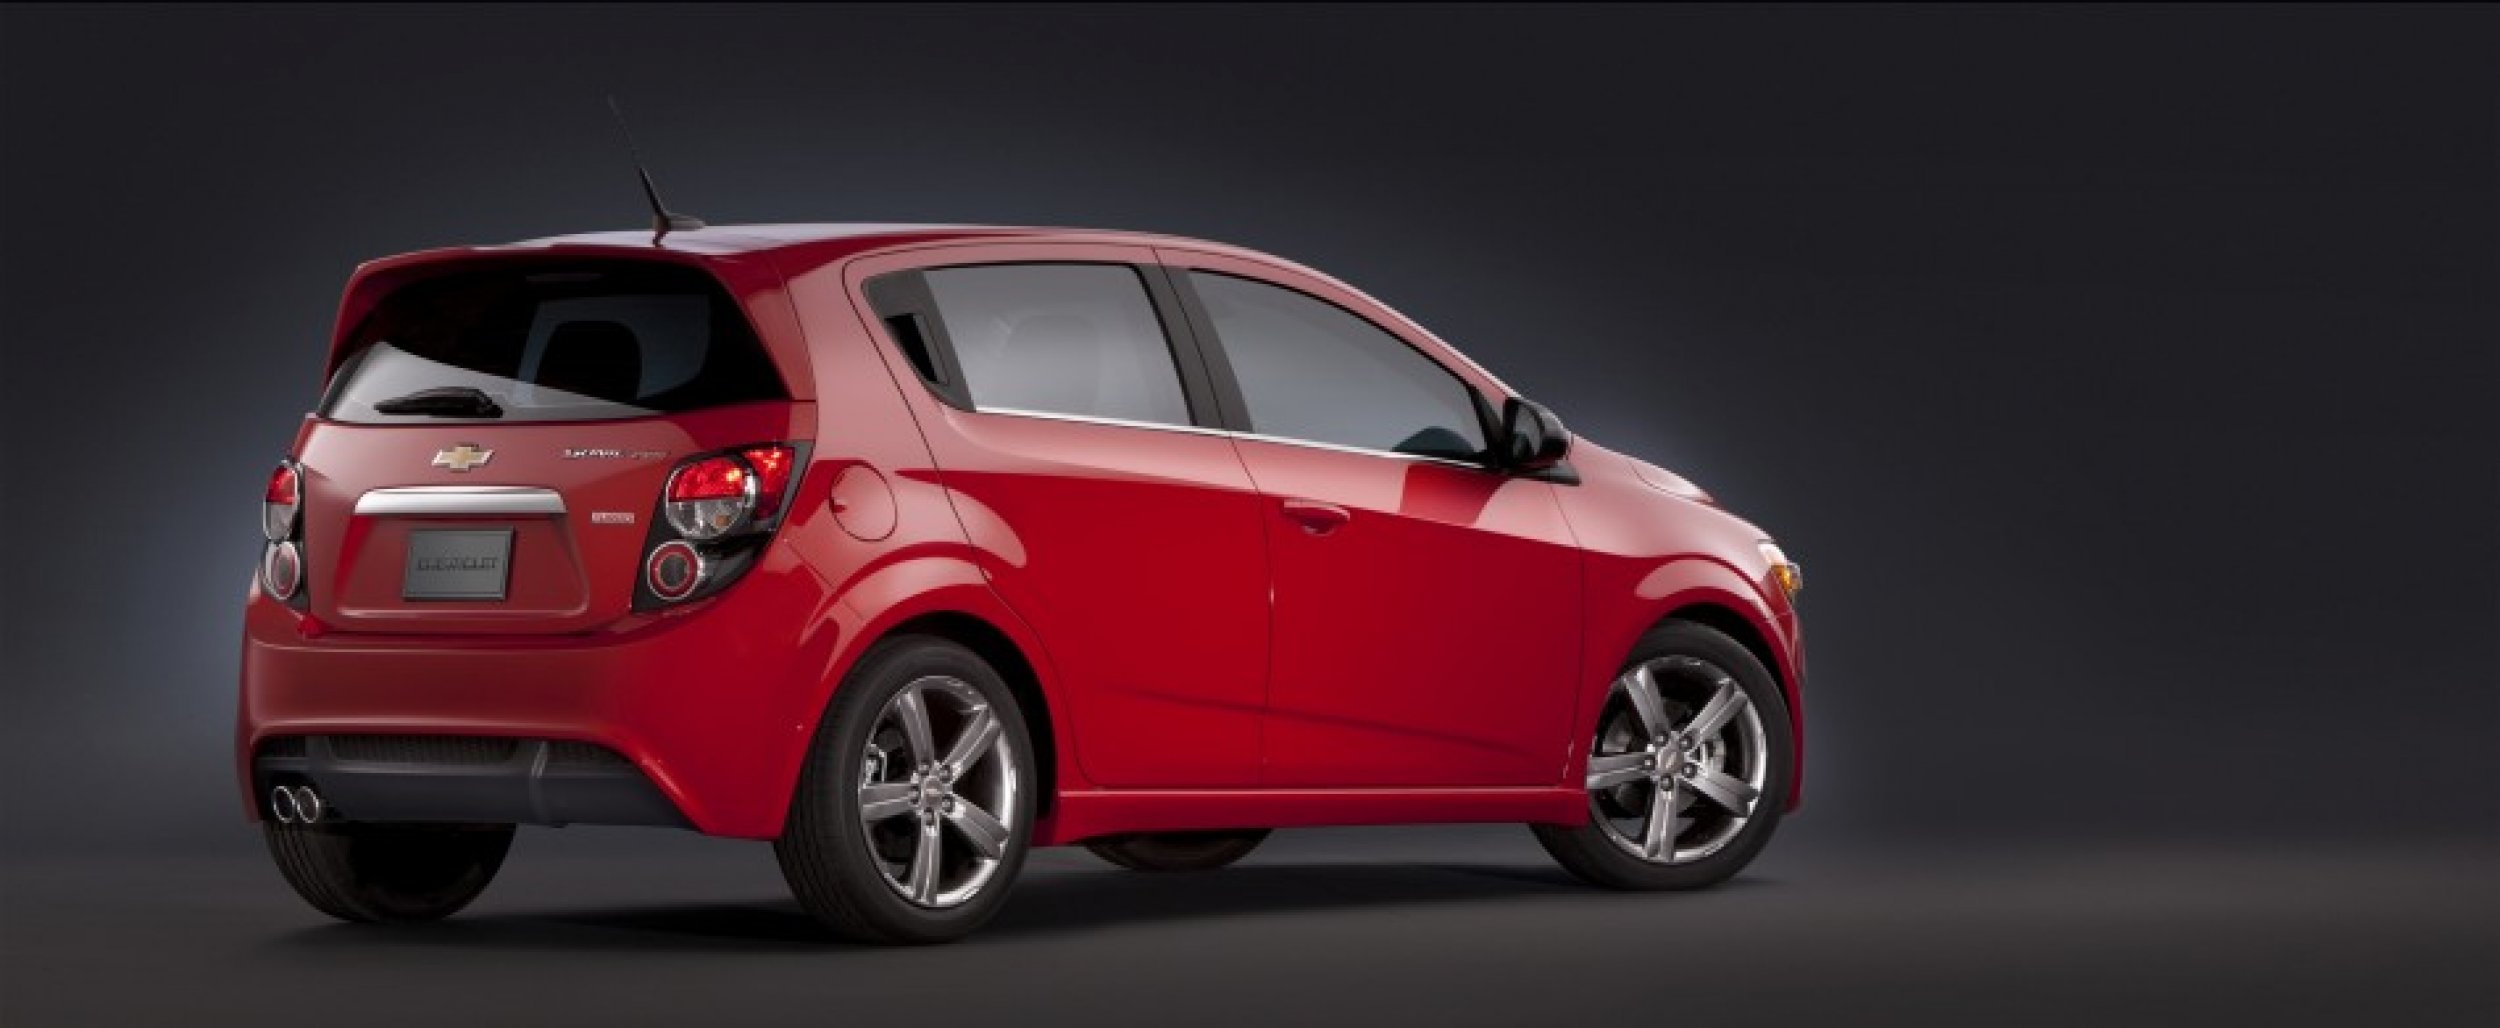 Chevy Sonic back